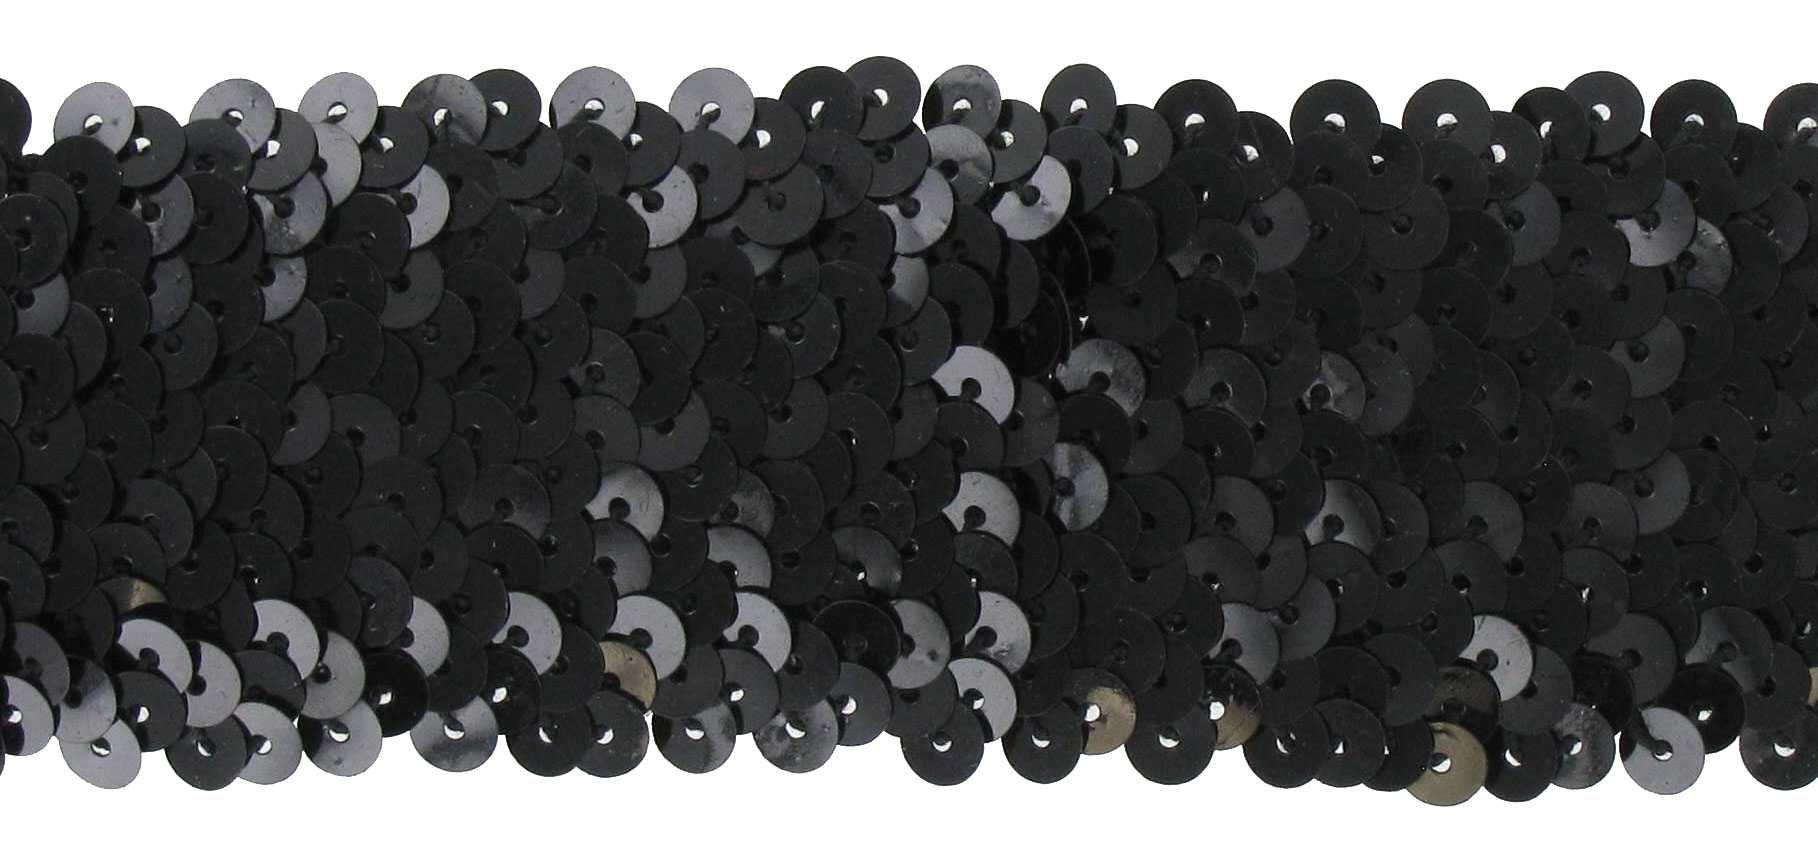 4mm Flat Strung Sequin Trim Black Houndstooth Print 5 Yards Made in USA 